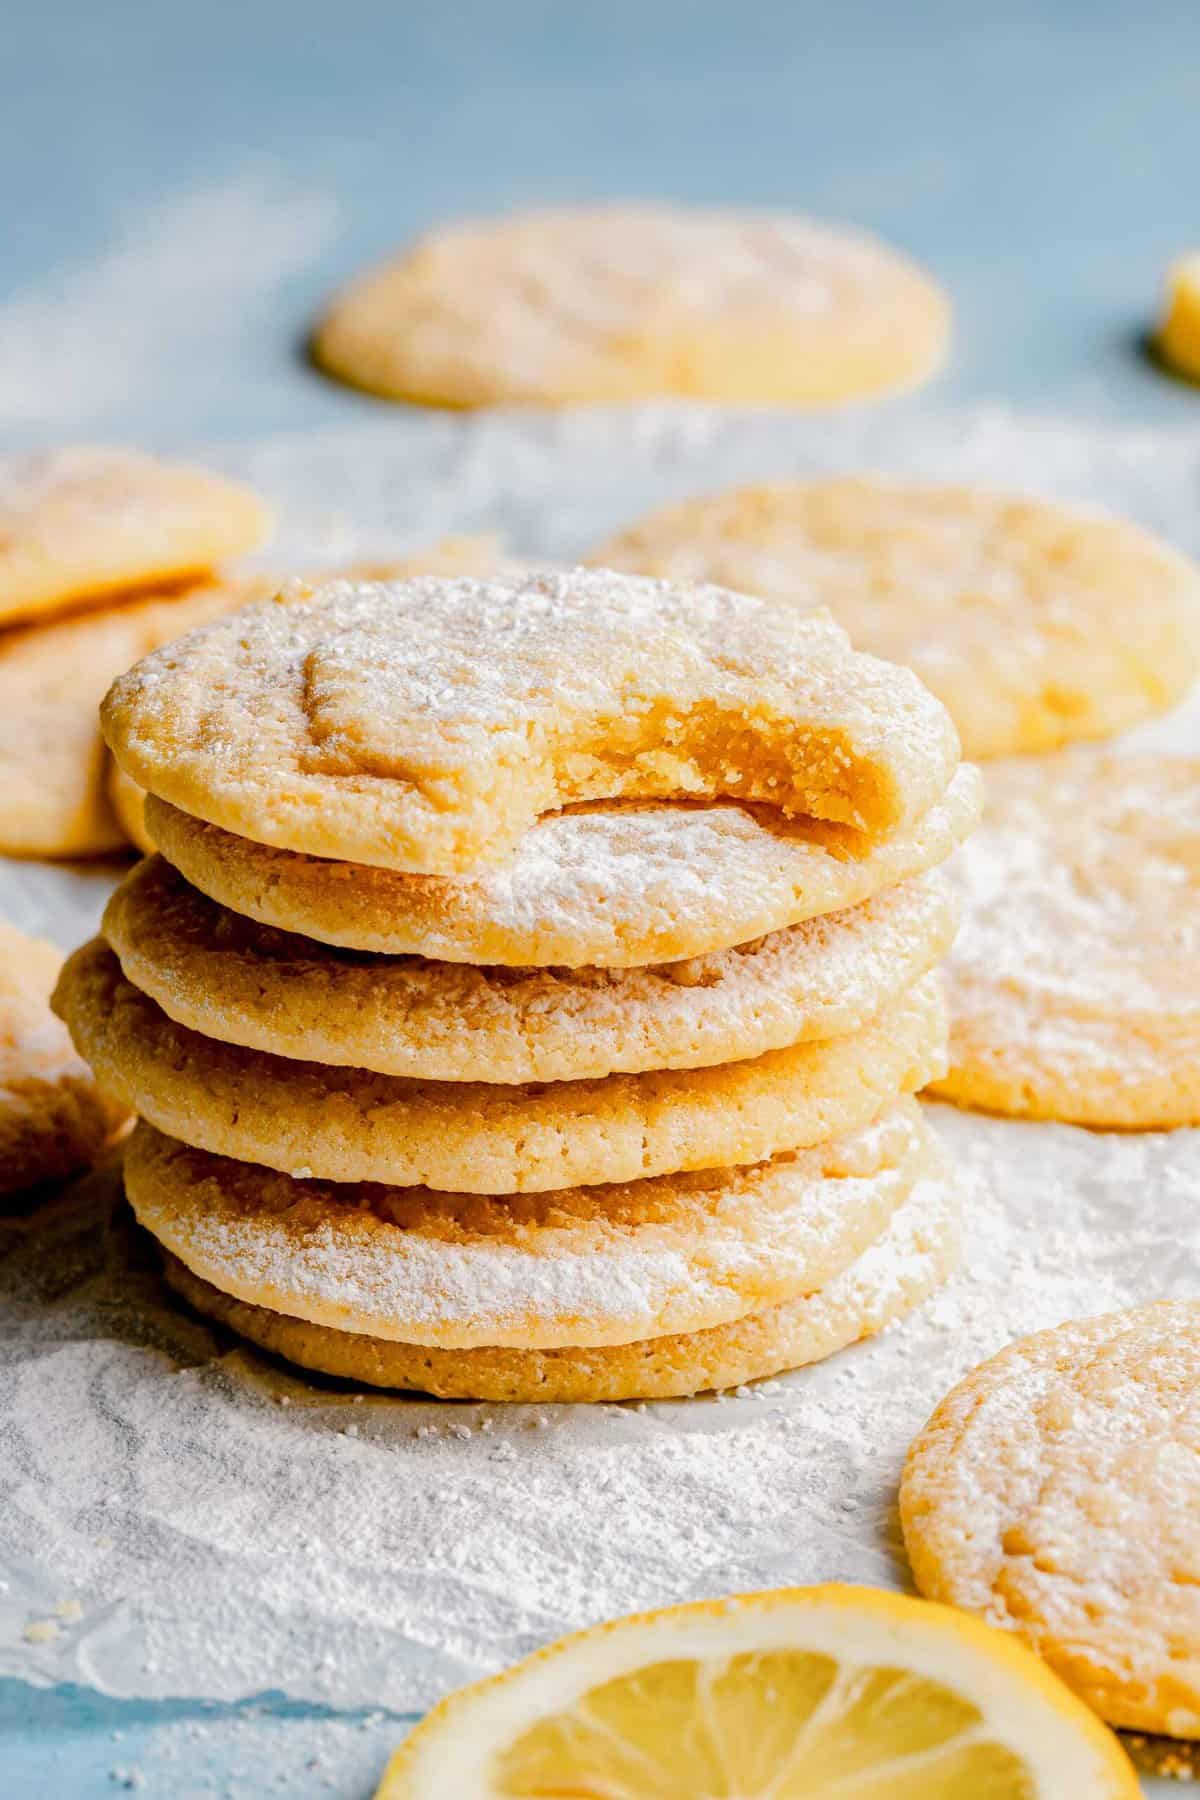 A stack of lemon cookies. The top cookie has a bight taken out of it.